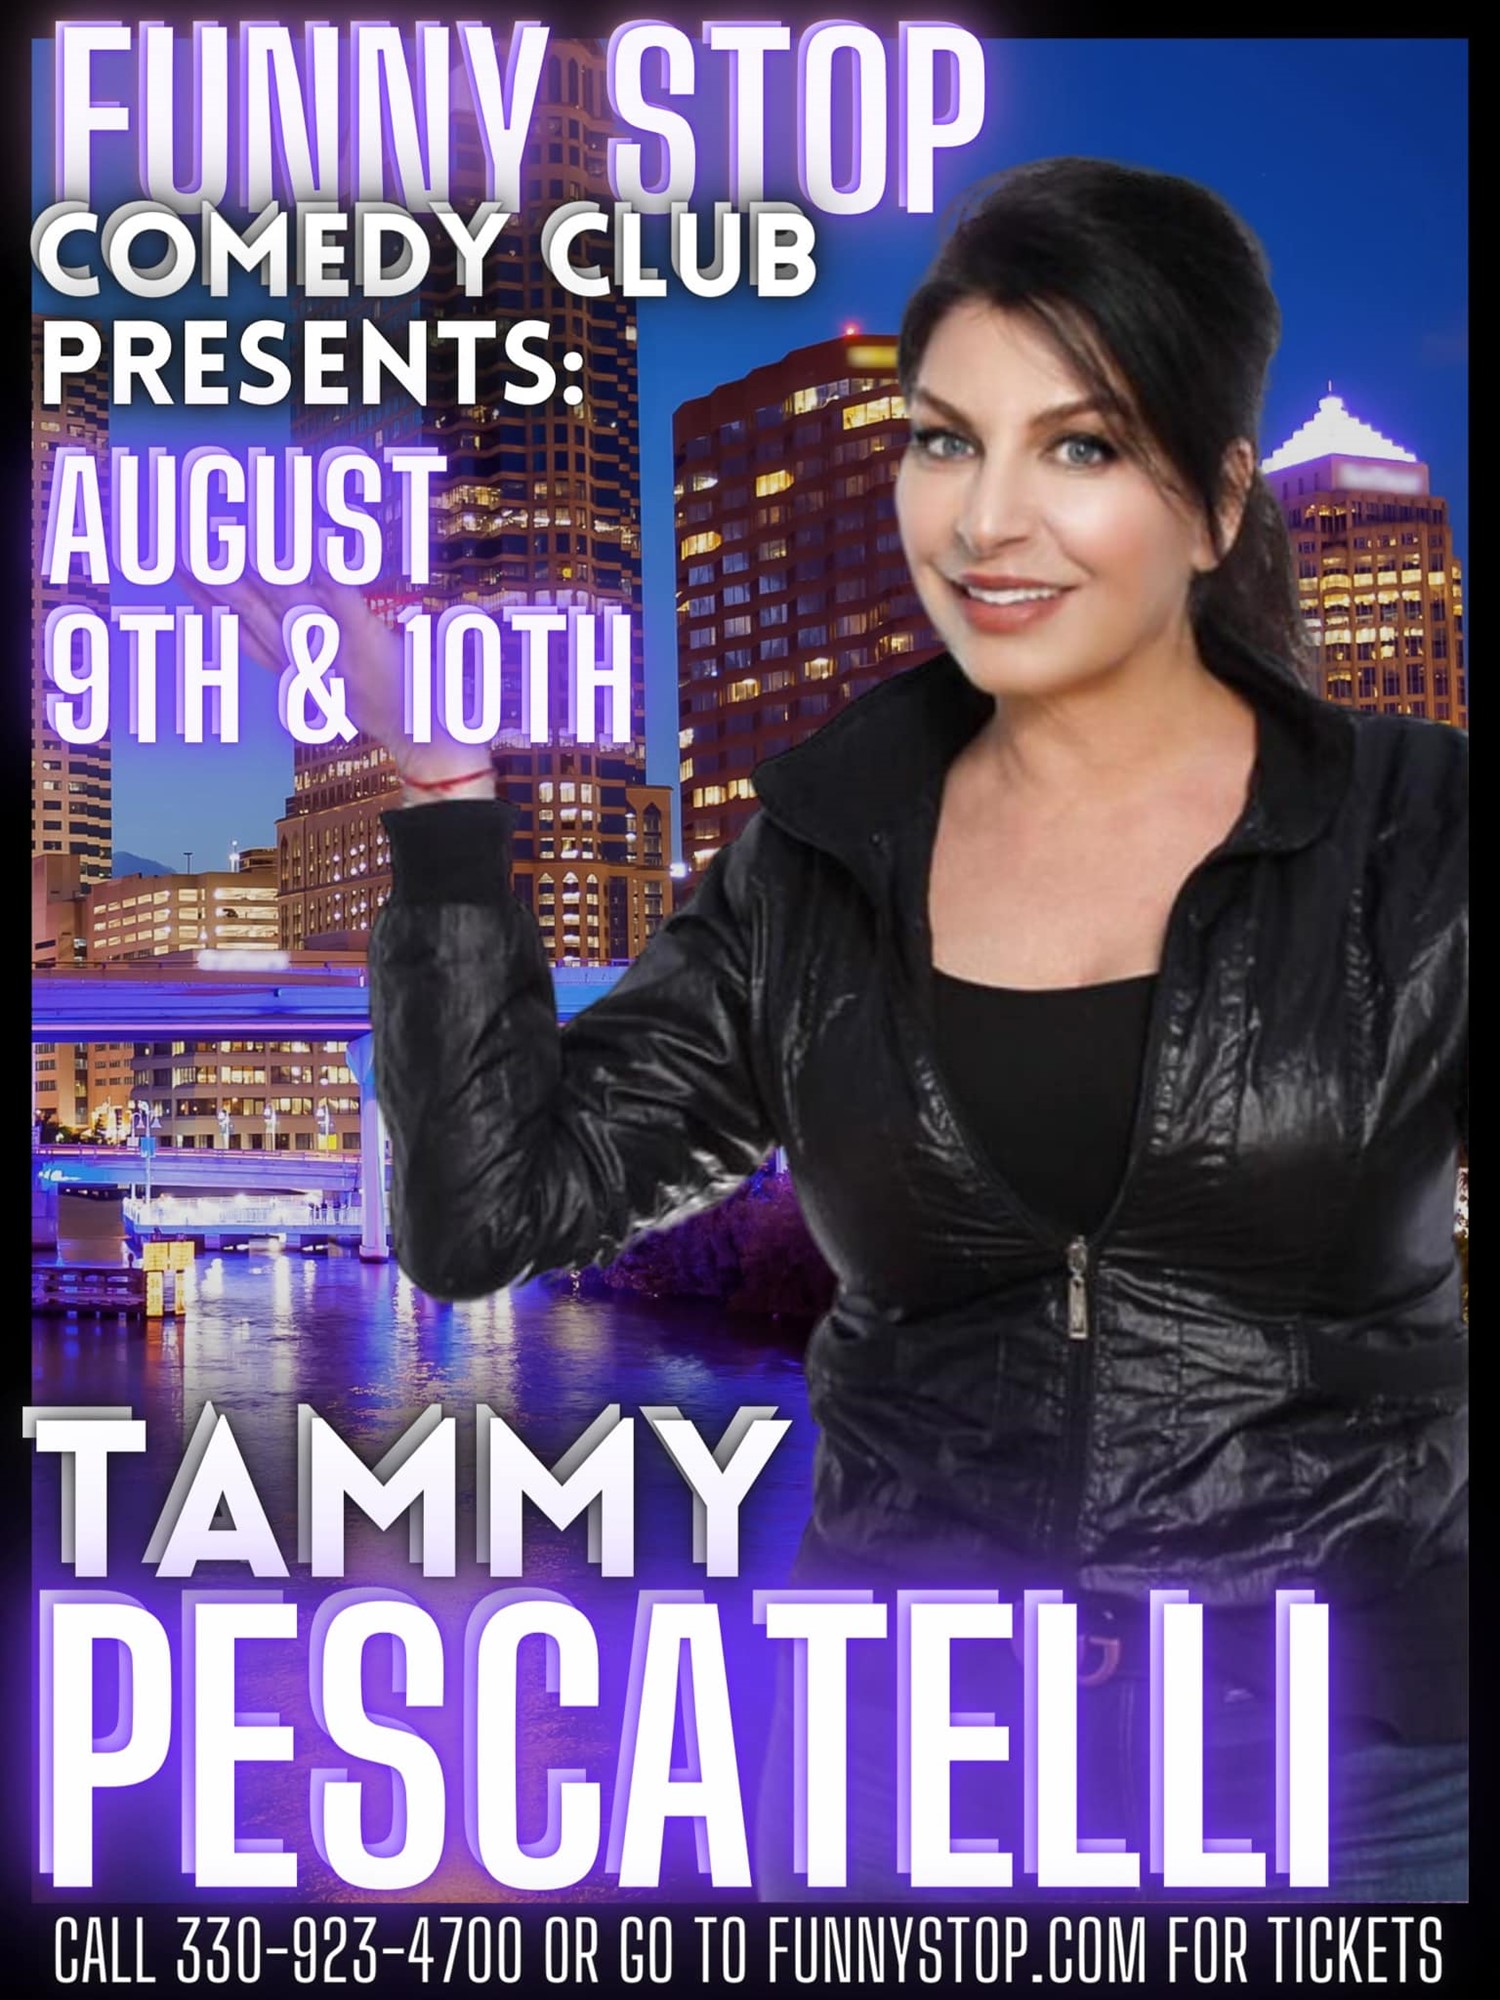 Tammy Pescatelli - Sat. 9:30 Show Funny Stop Comedy Club on Aug 10, 21:30@Funny Stop Comedy Club - Buy tickets and Get information on Funny Stop funnystop.online